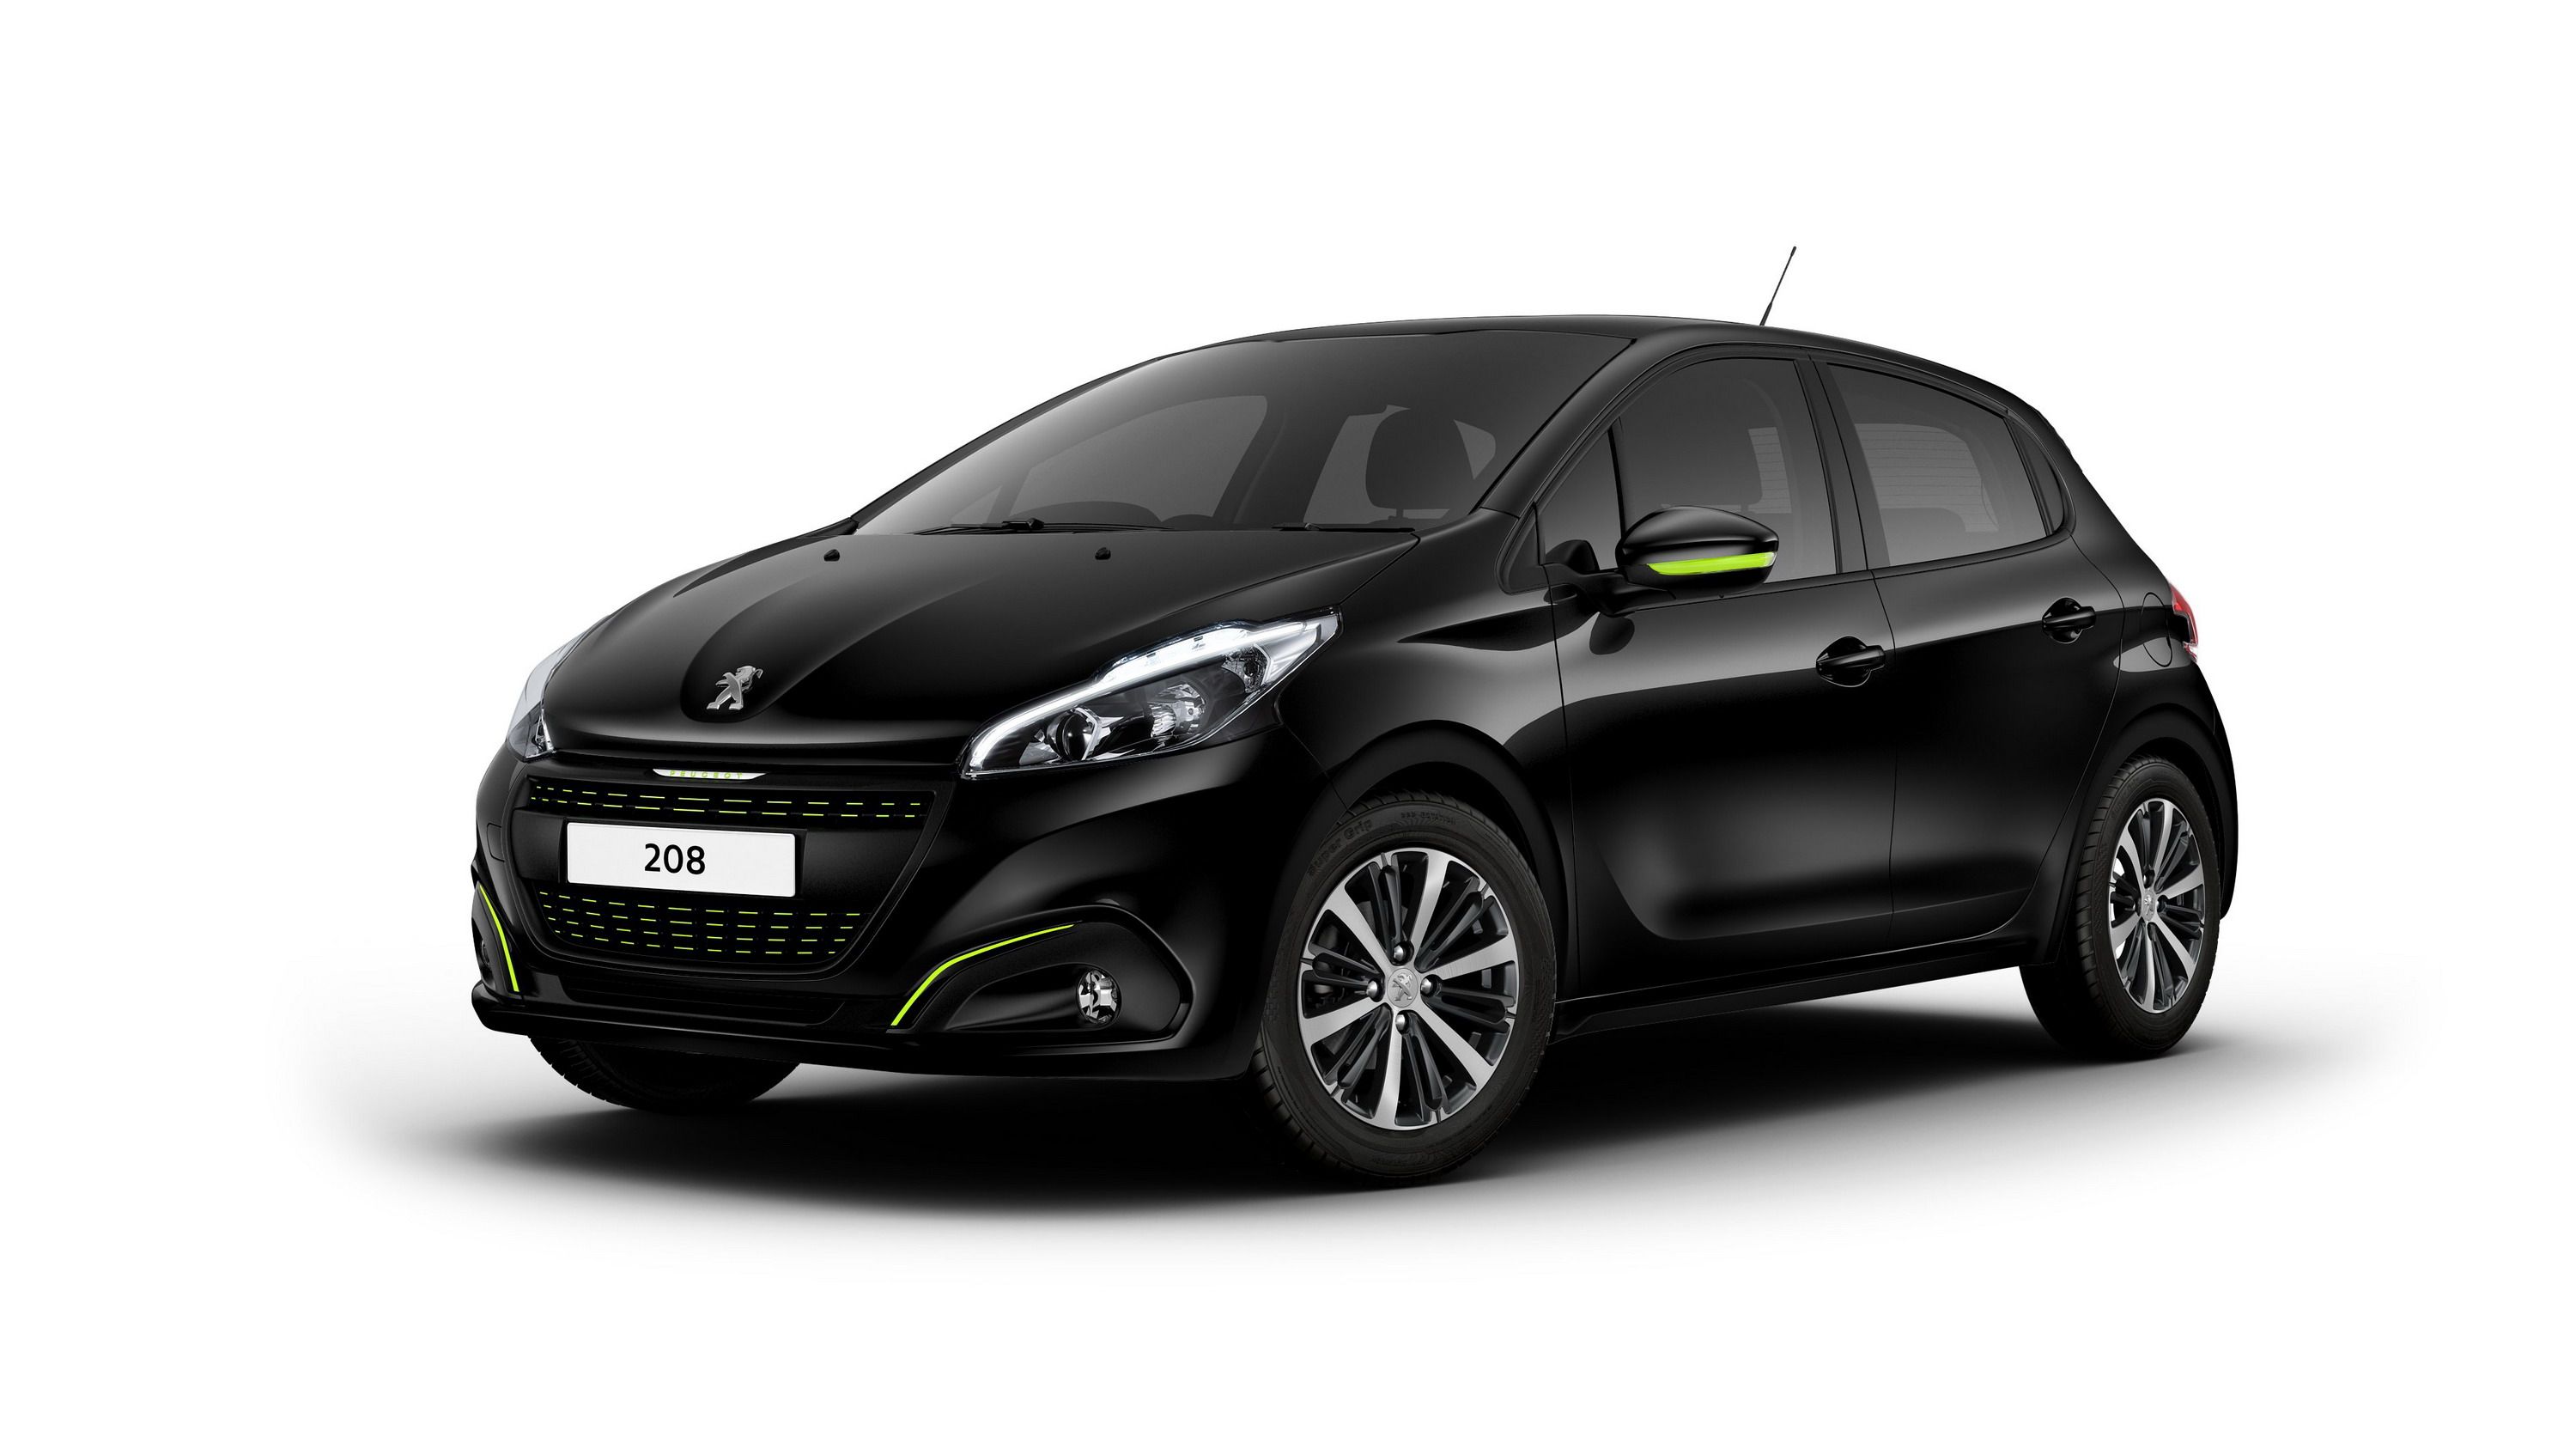 2016 Peugeot 208 XS Special Edition